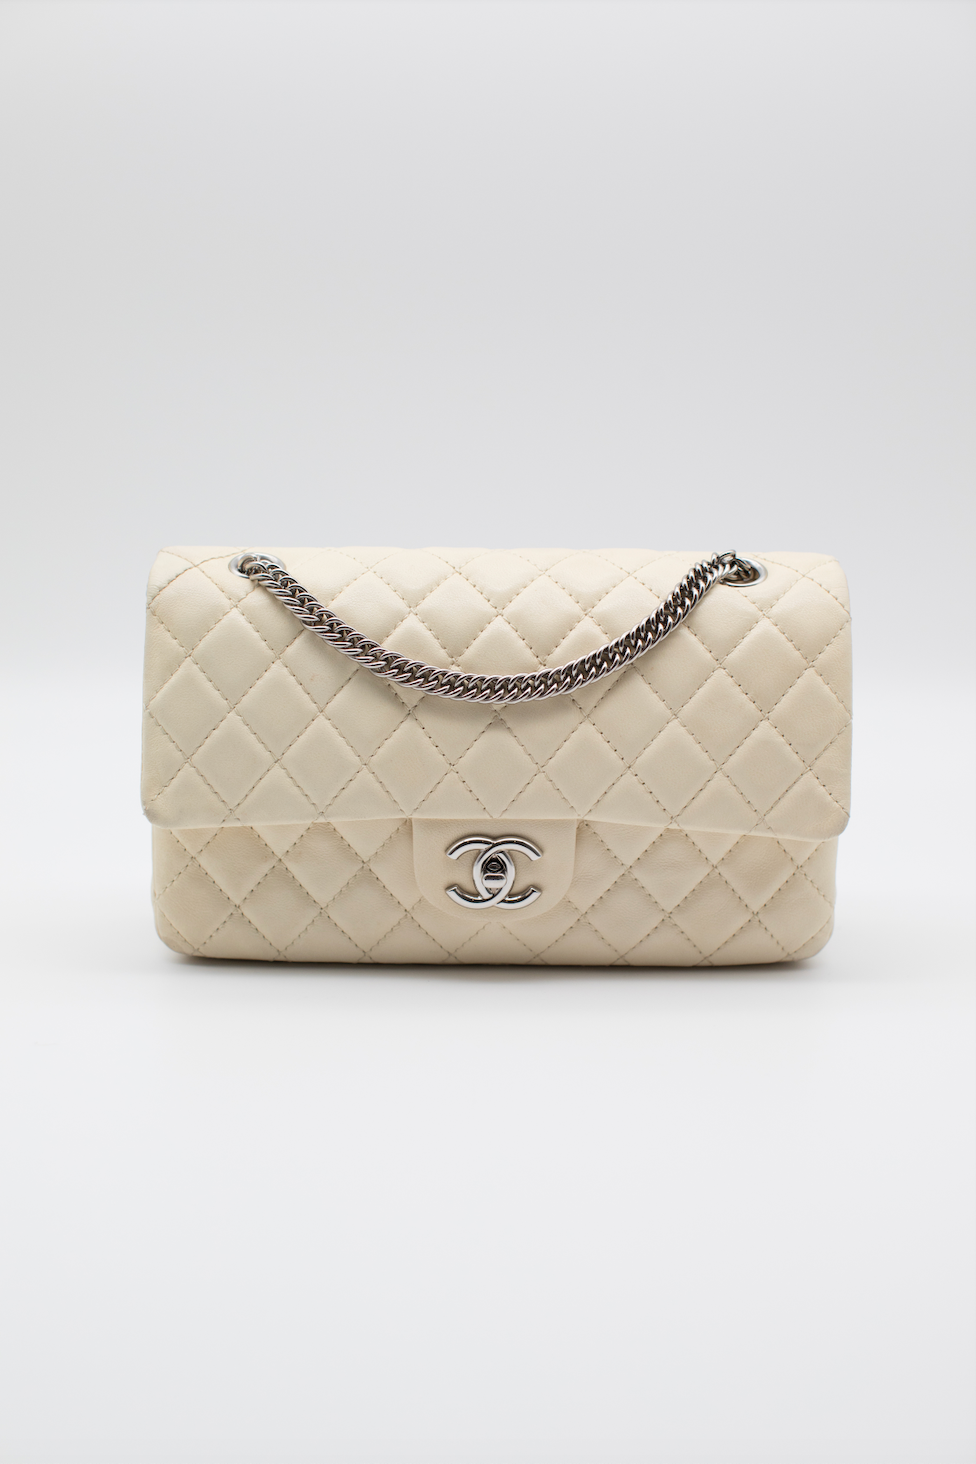 Chanel Cream Medium Double Flap Bag in Lambskin with Silver